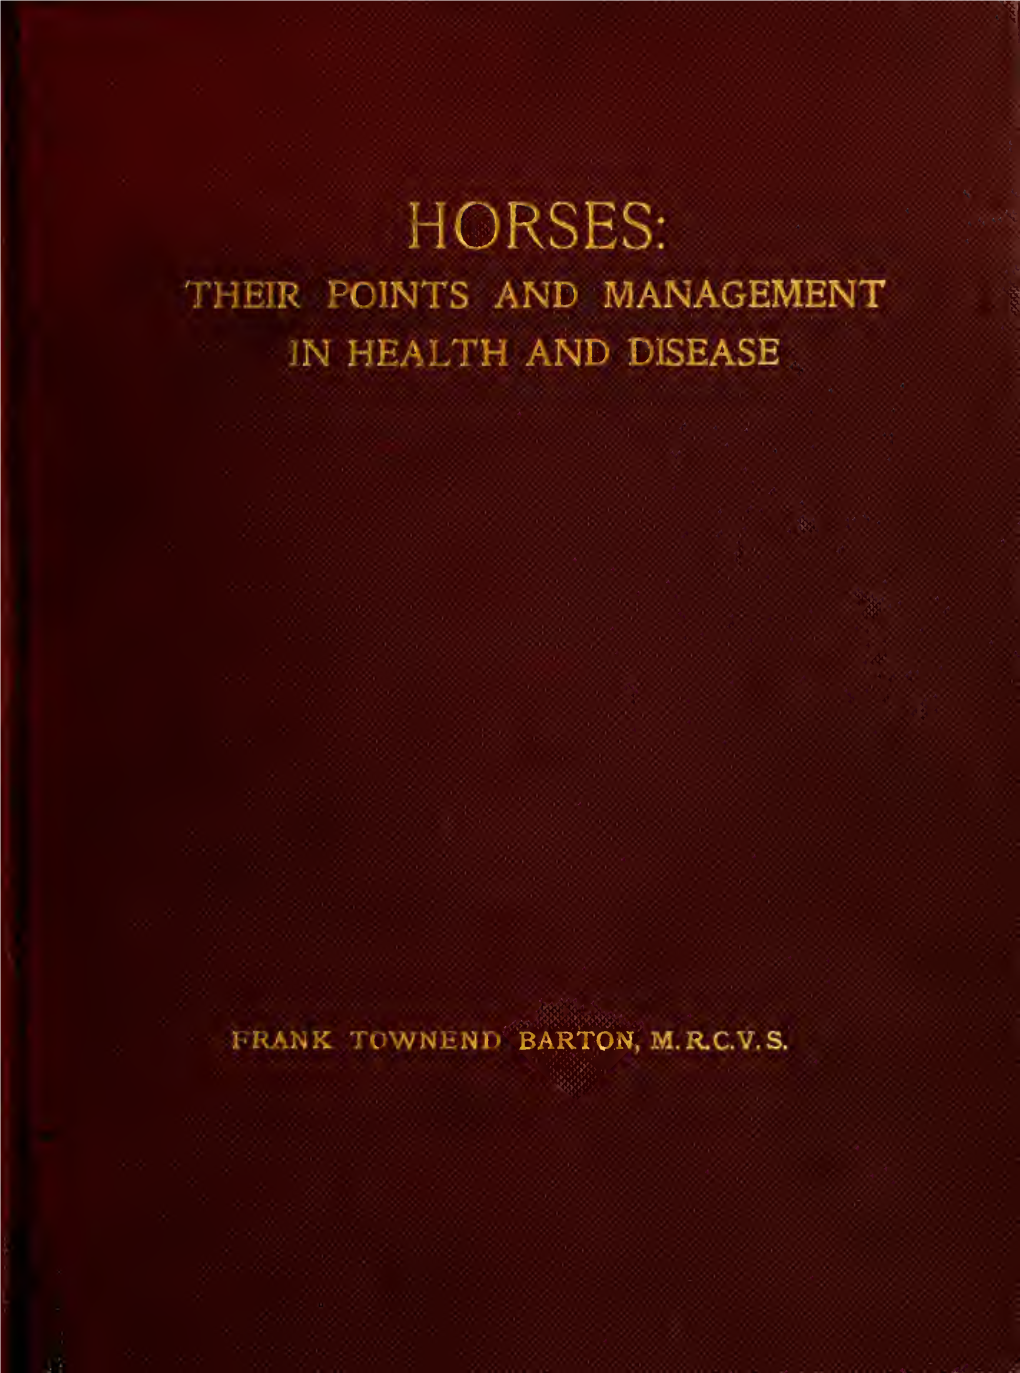 Horses : Their Points and Management in Health and Disease